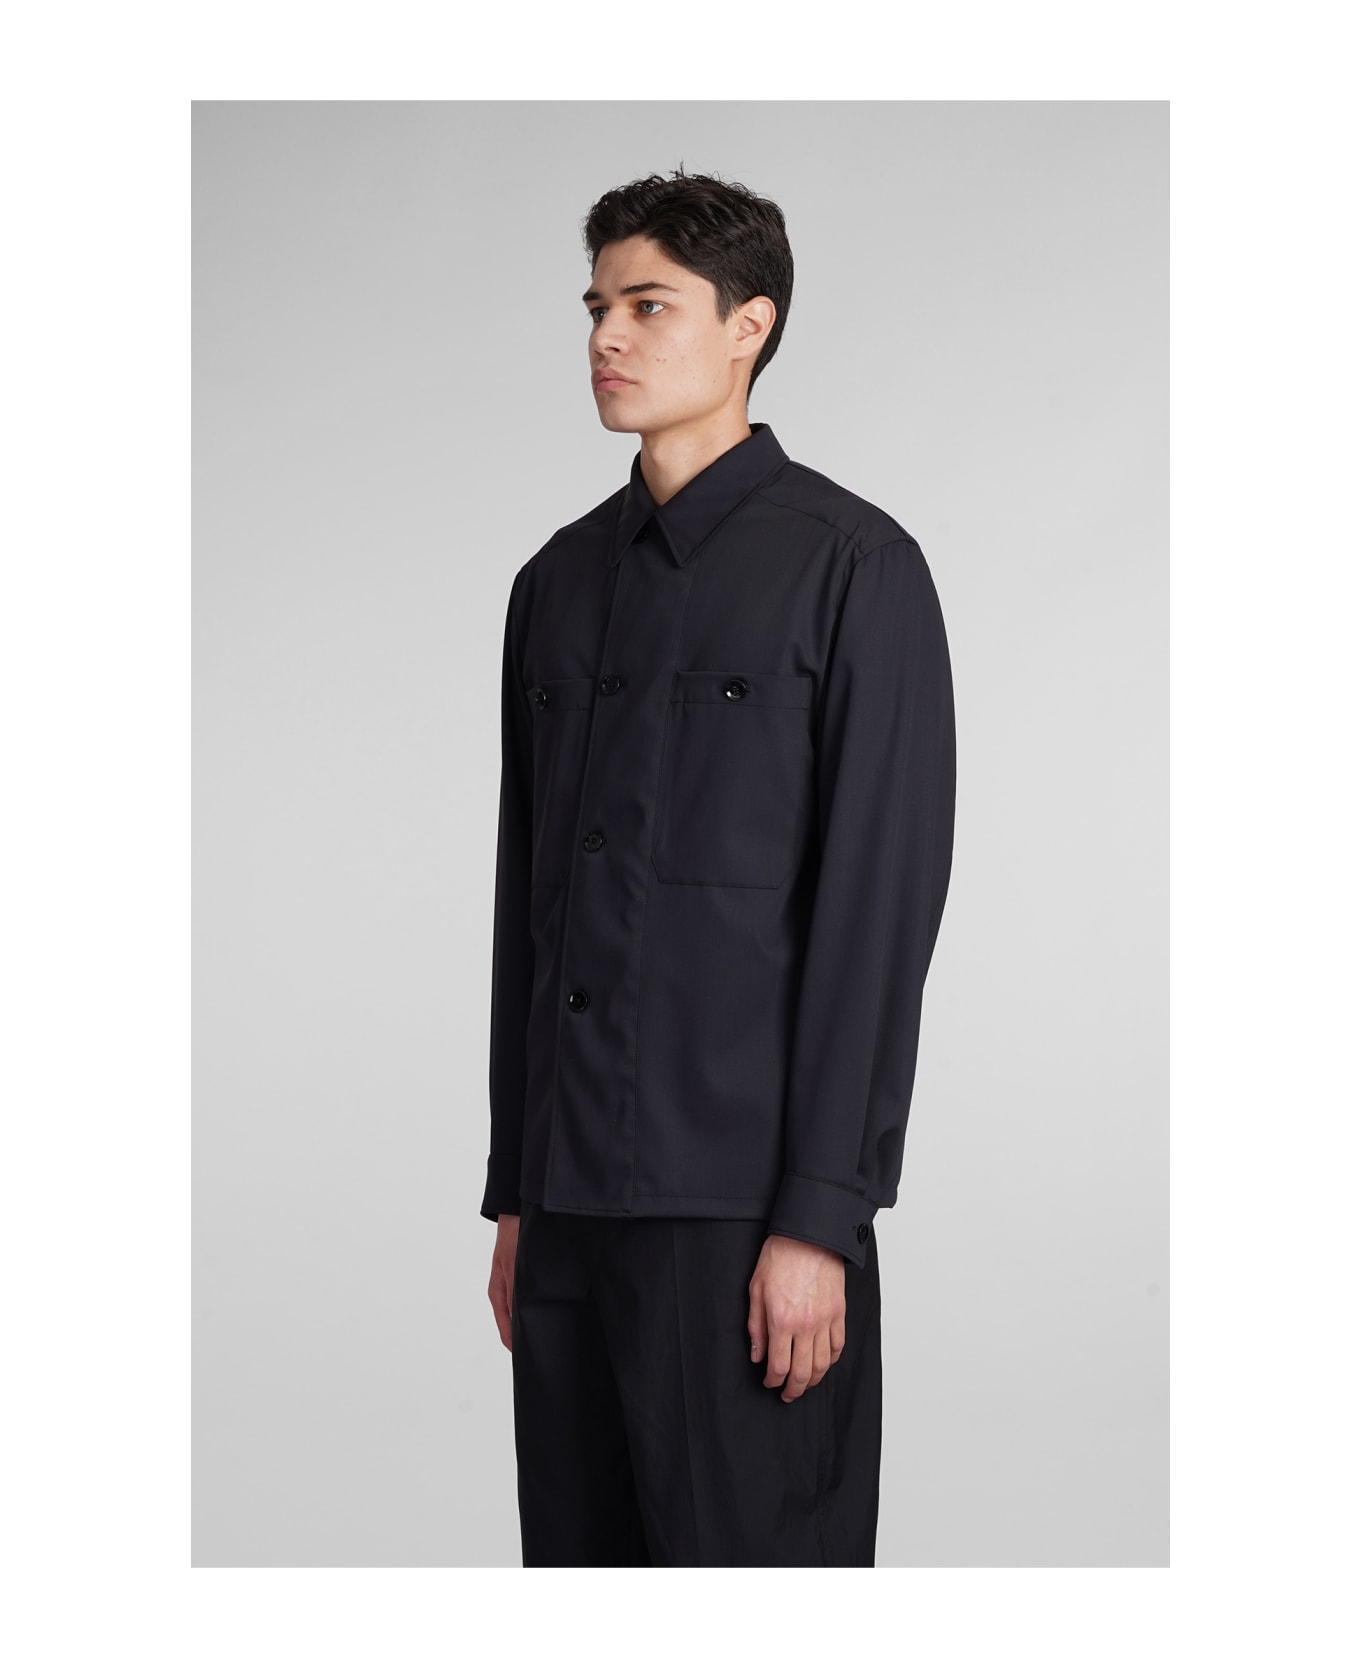 Lemaire Lon Sleeved Buttoned Shirt Jacket - Black